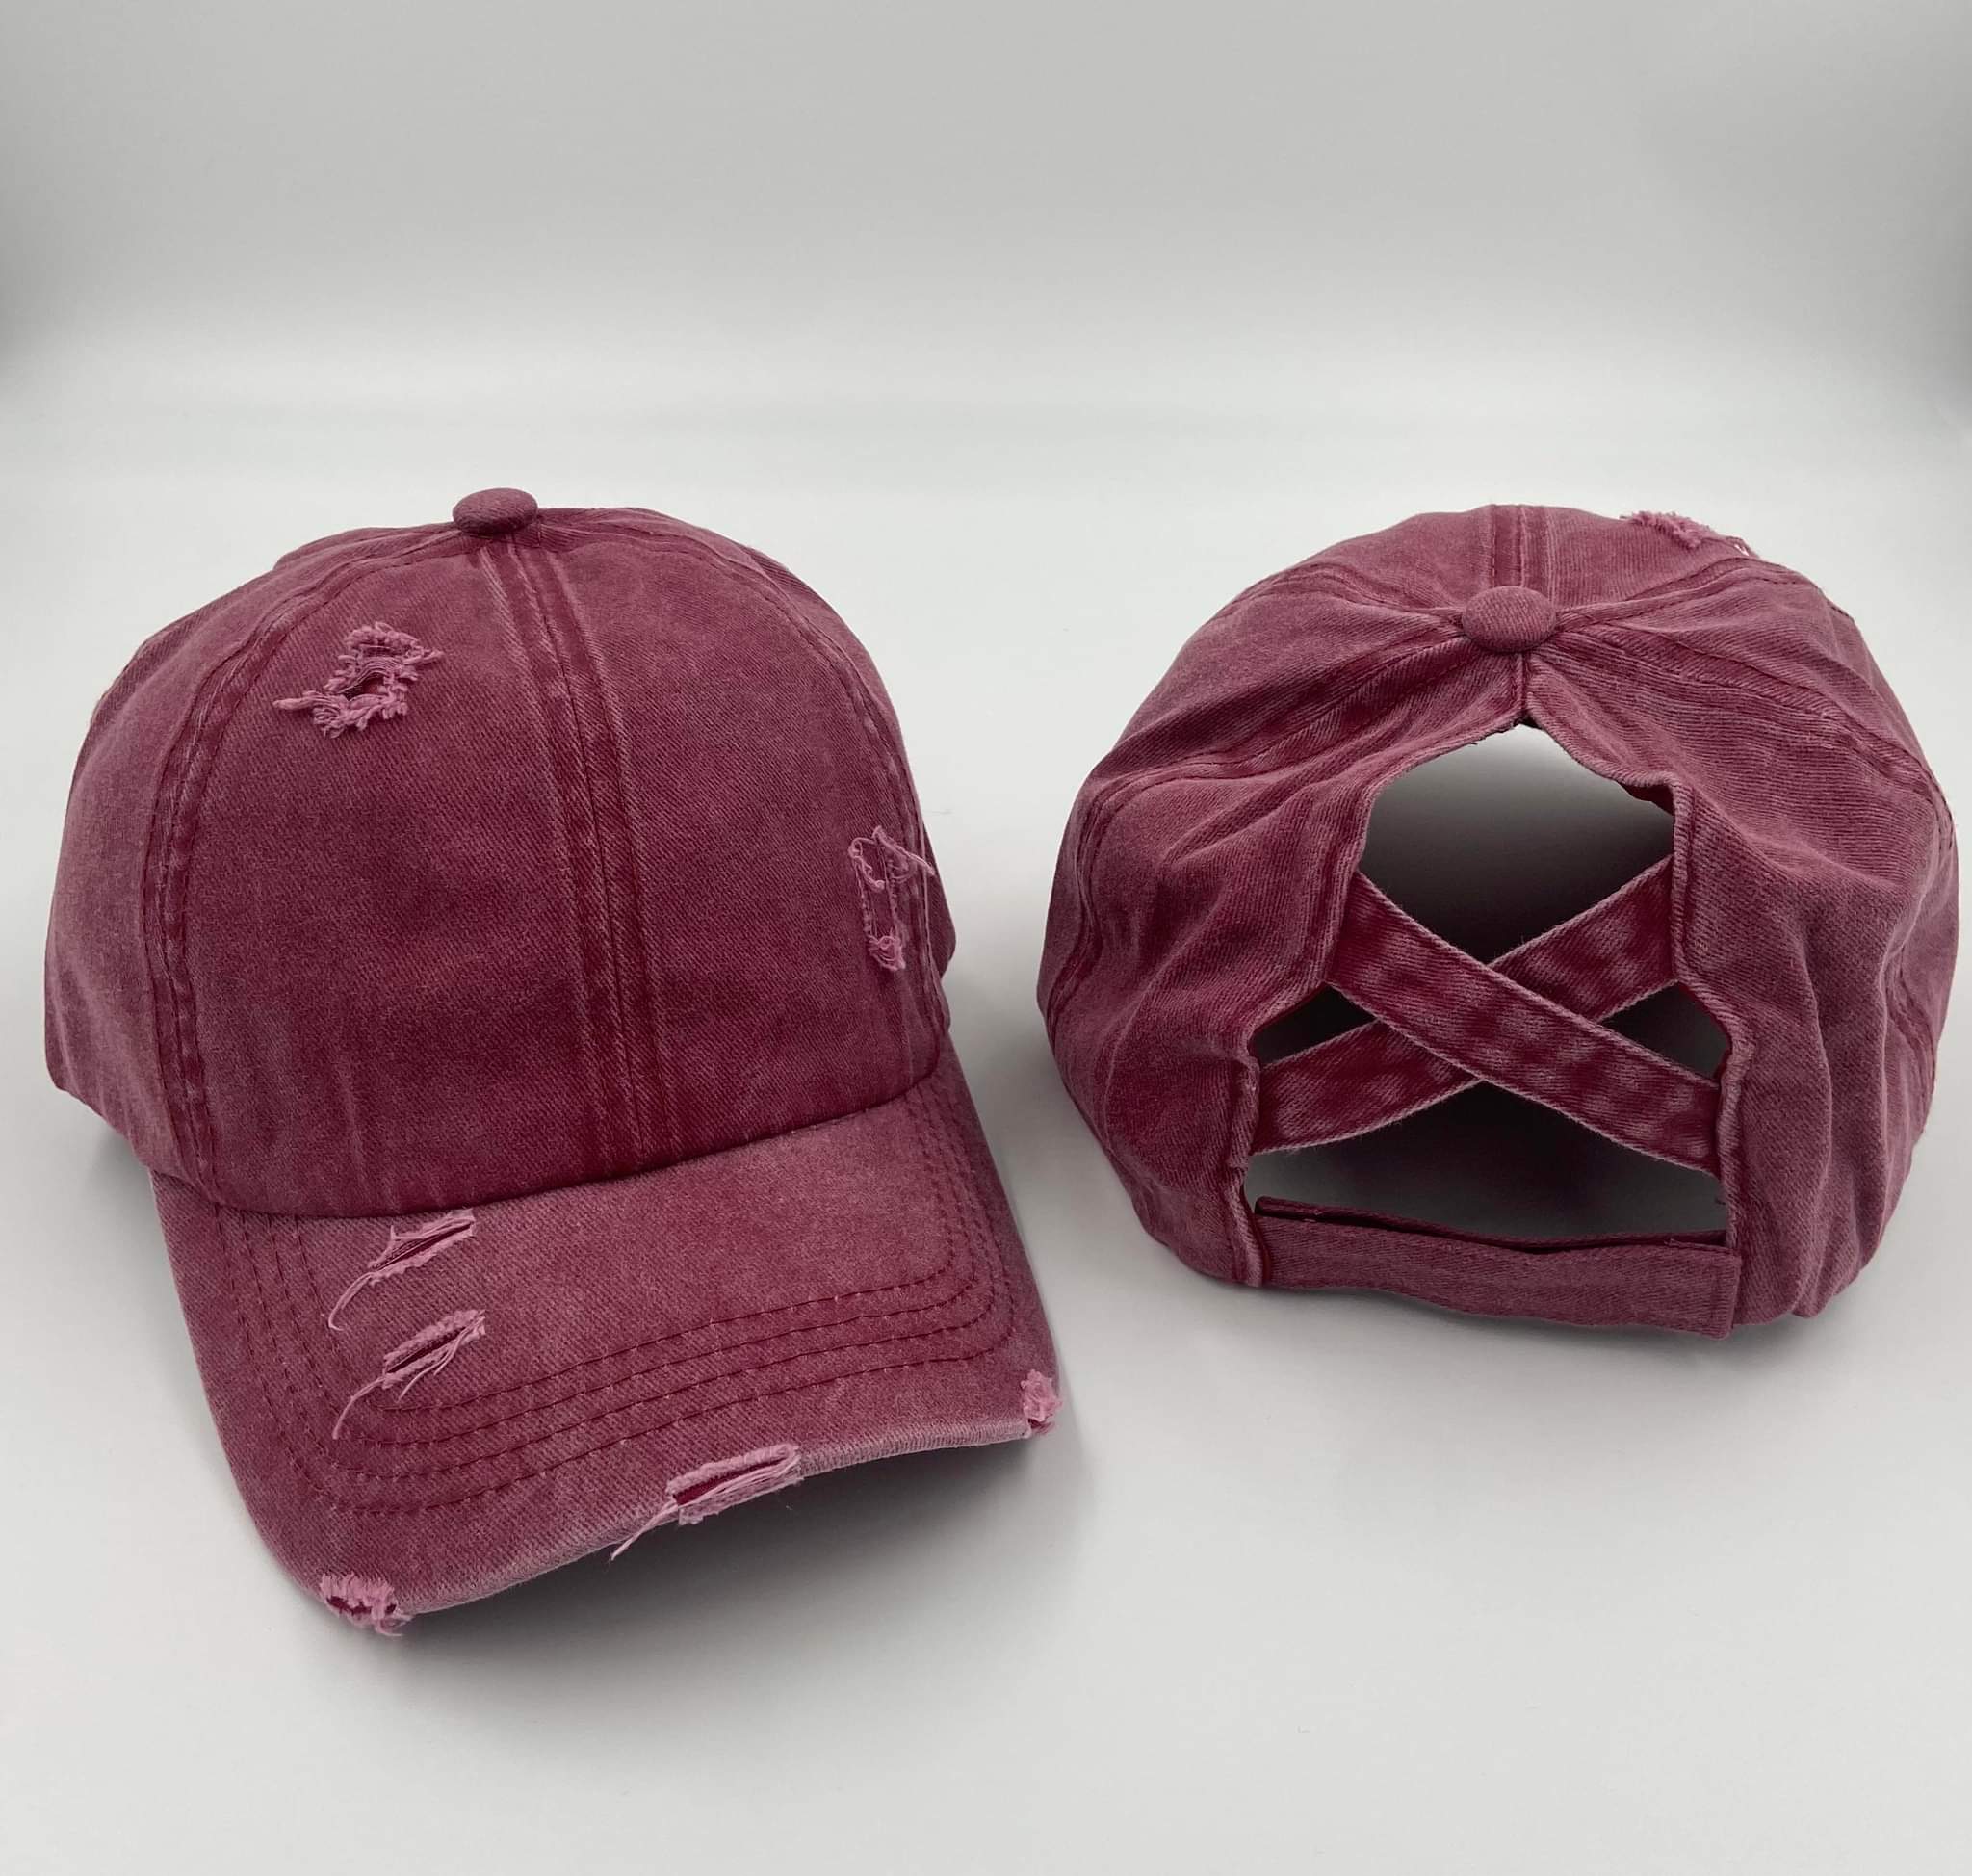 Maroon Distressed Cotton Criss Criss Ponytail Hat - Gals and Dogs Boutique Limited